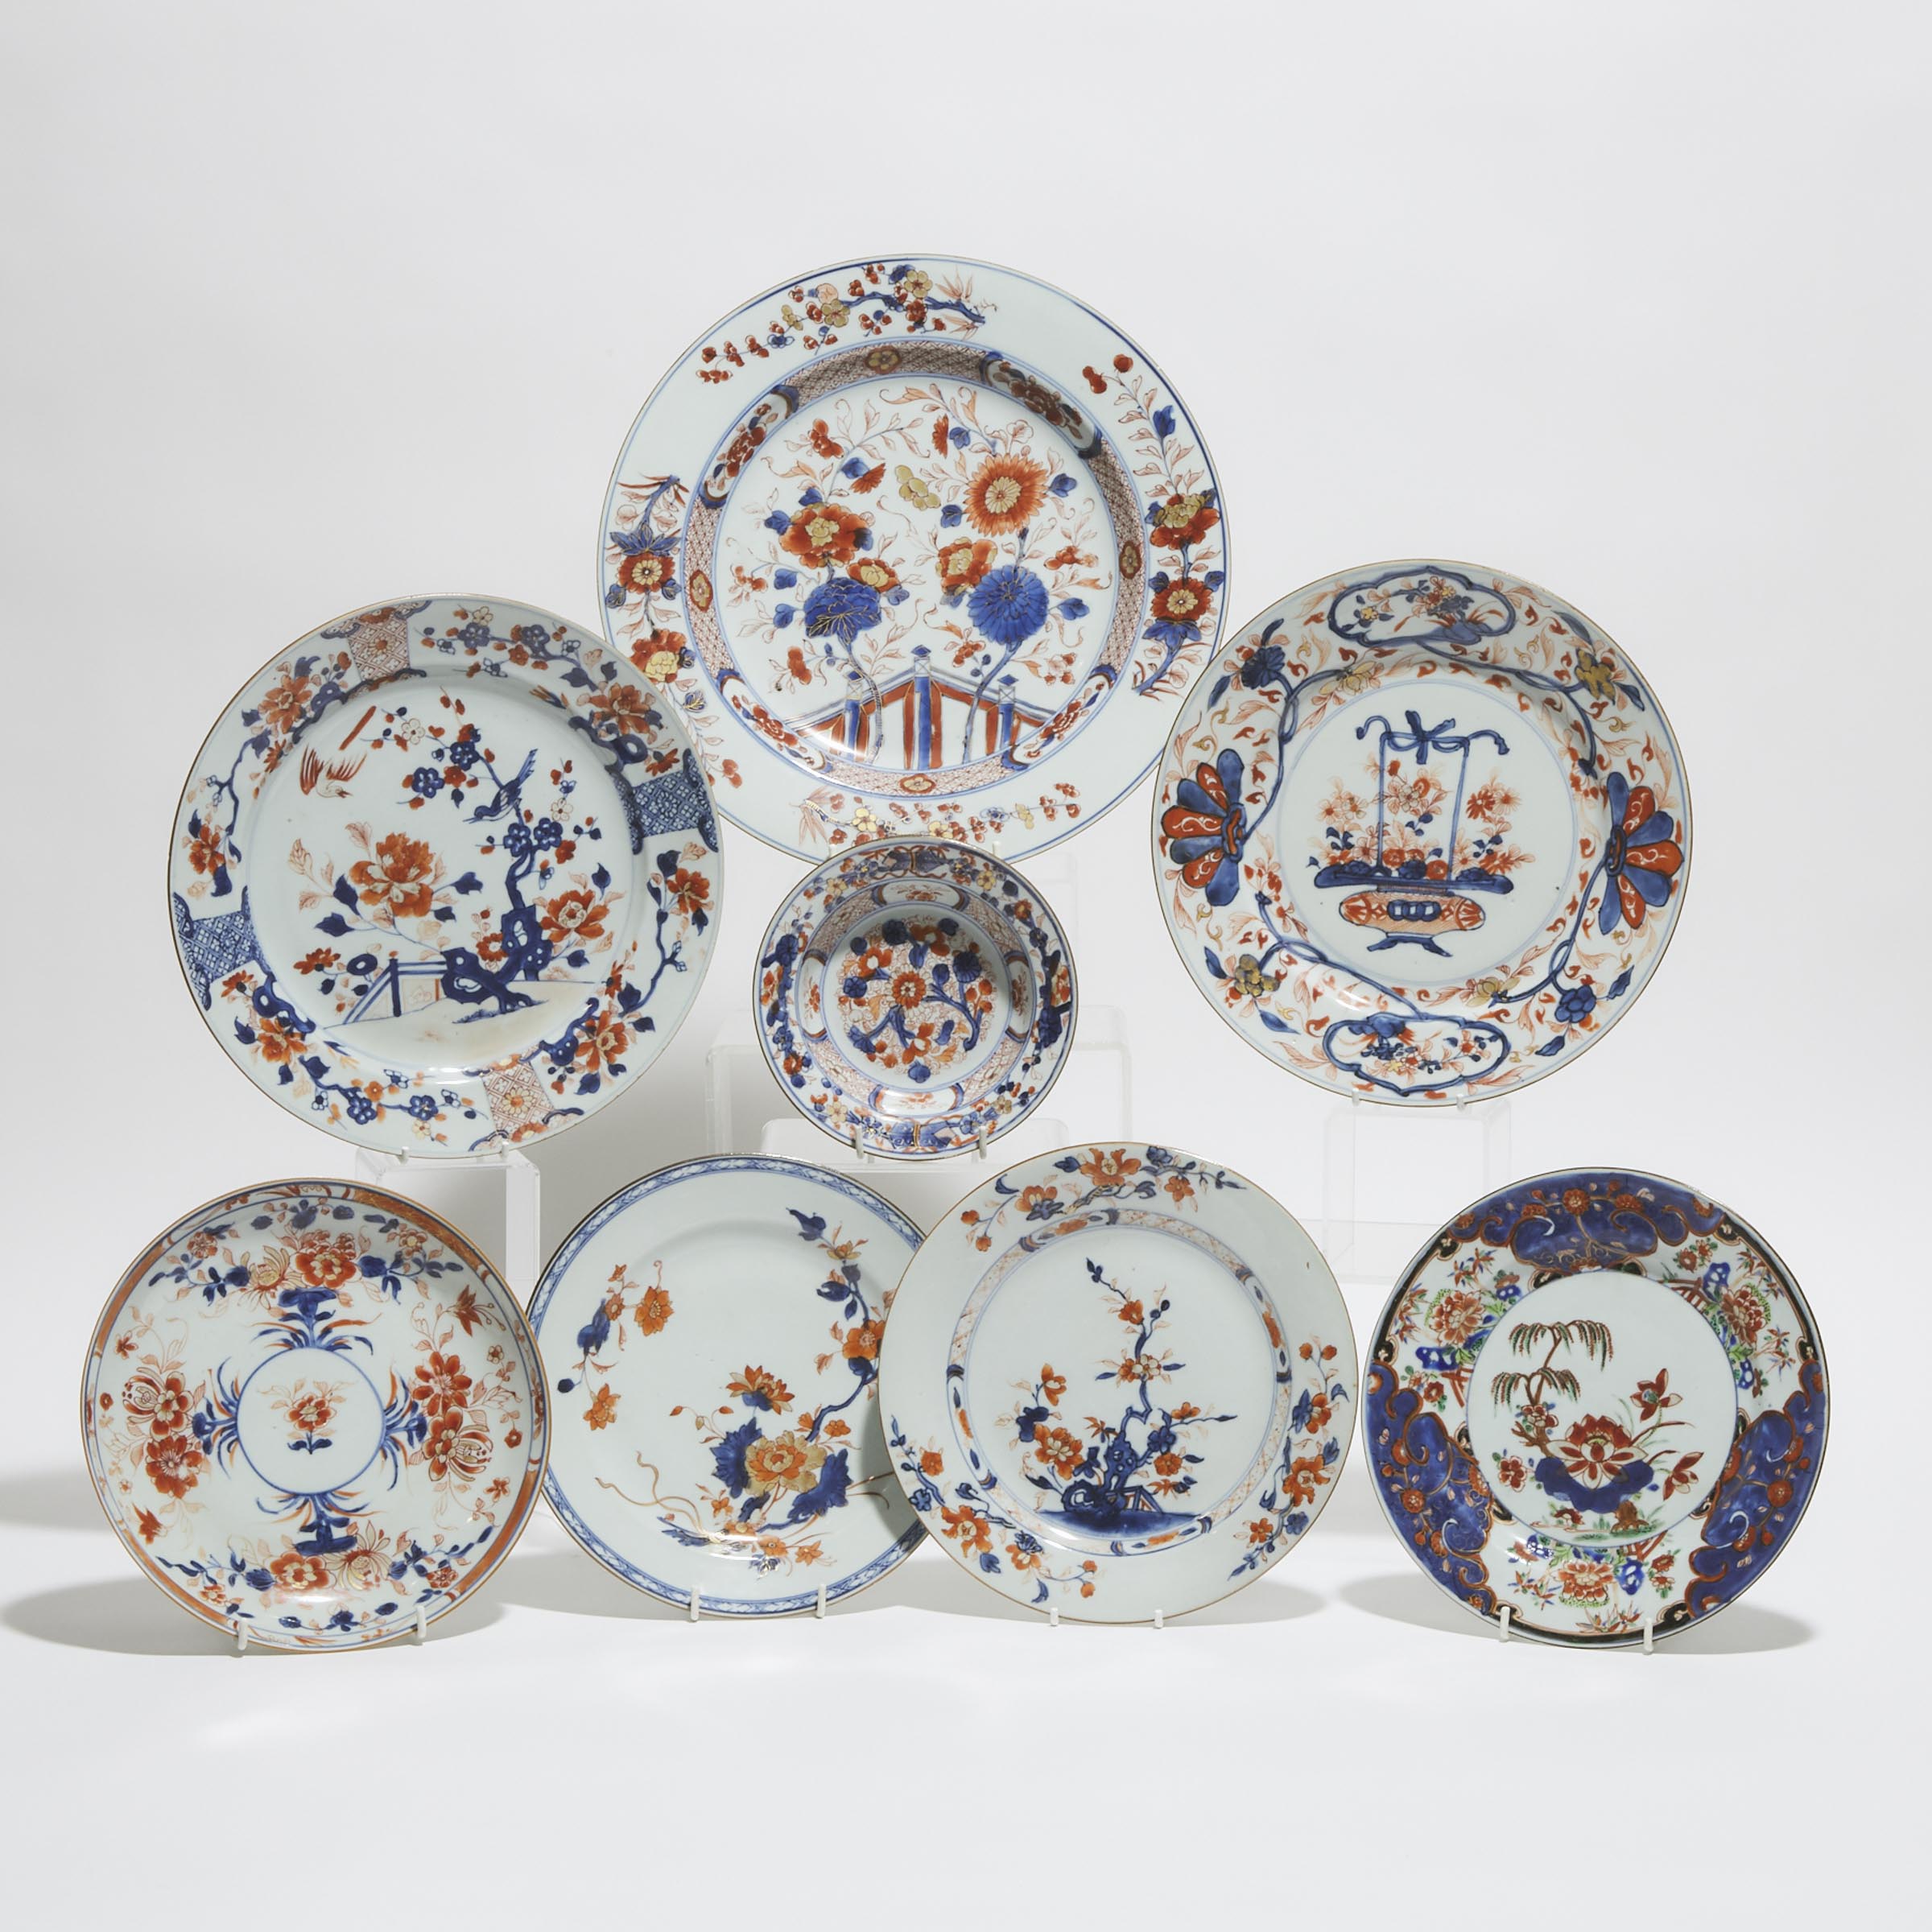 A Group of Eight Chinese Imari Dishes, 18th Century